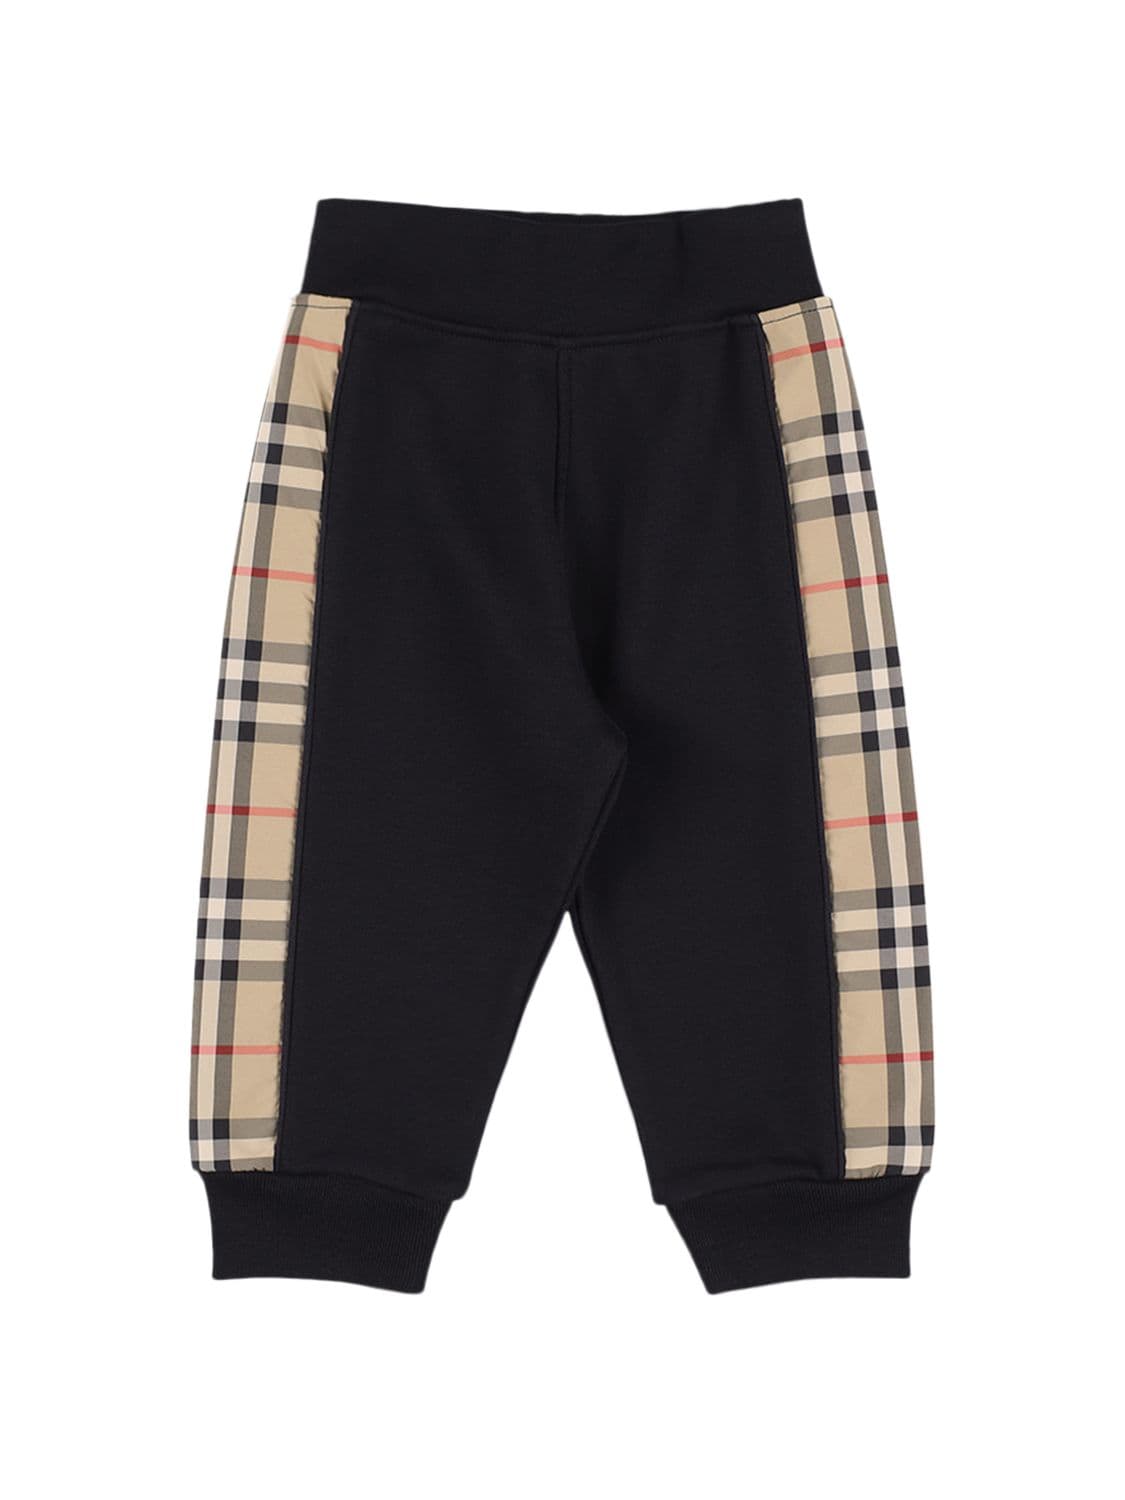 Burberry Kids' Cotton Sweatpants W/ Check Inserts In Black